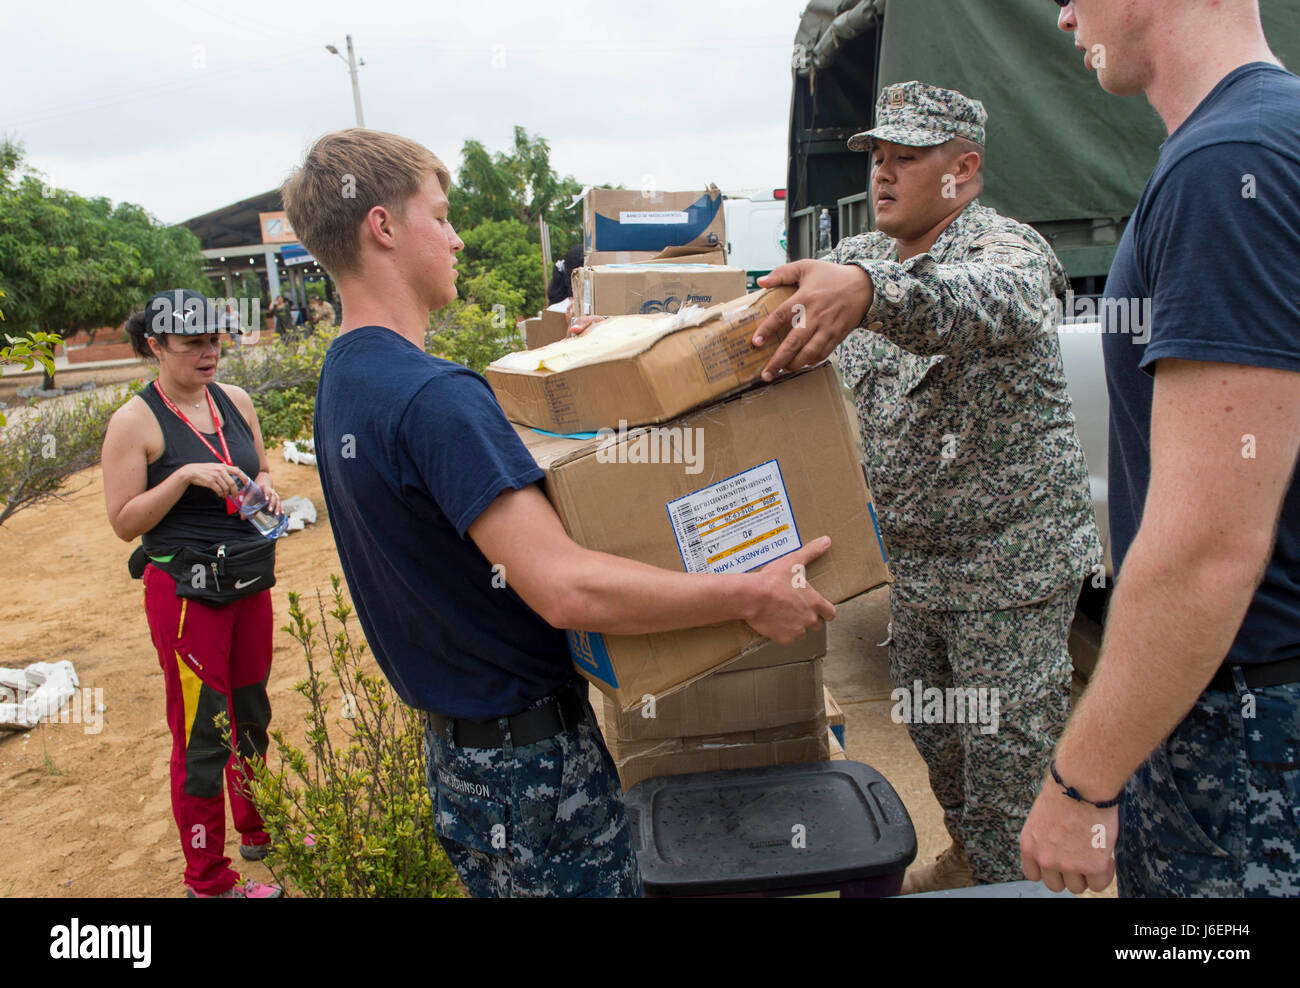 170324-N-YL073-036 MAYAPO, Colombia (March 24, 2017) - Hospitalman Kraylor Kirk-Johnson, a native of Laguna Beach, Calif., assigned to Naval Branch Health Clinic Jacksonville, Fla., moves medical supplies donated to the people of Colombia by the U.S. charity Children’s Vision International at the Continuing Promise 2017 (CP-17) medical site in Mayapo, Colombia. CP-17 is a U.S. Southern Command-sponsored and U.S. Naval Forces Southern Command/U.S. 4th Fleet-conducted deployment to conduct civil-military operations including humanitarian assistance, training engagements, and medical, dental, and Stock Photo